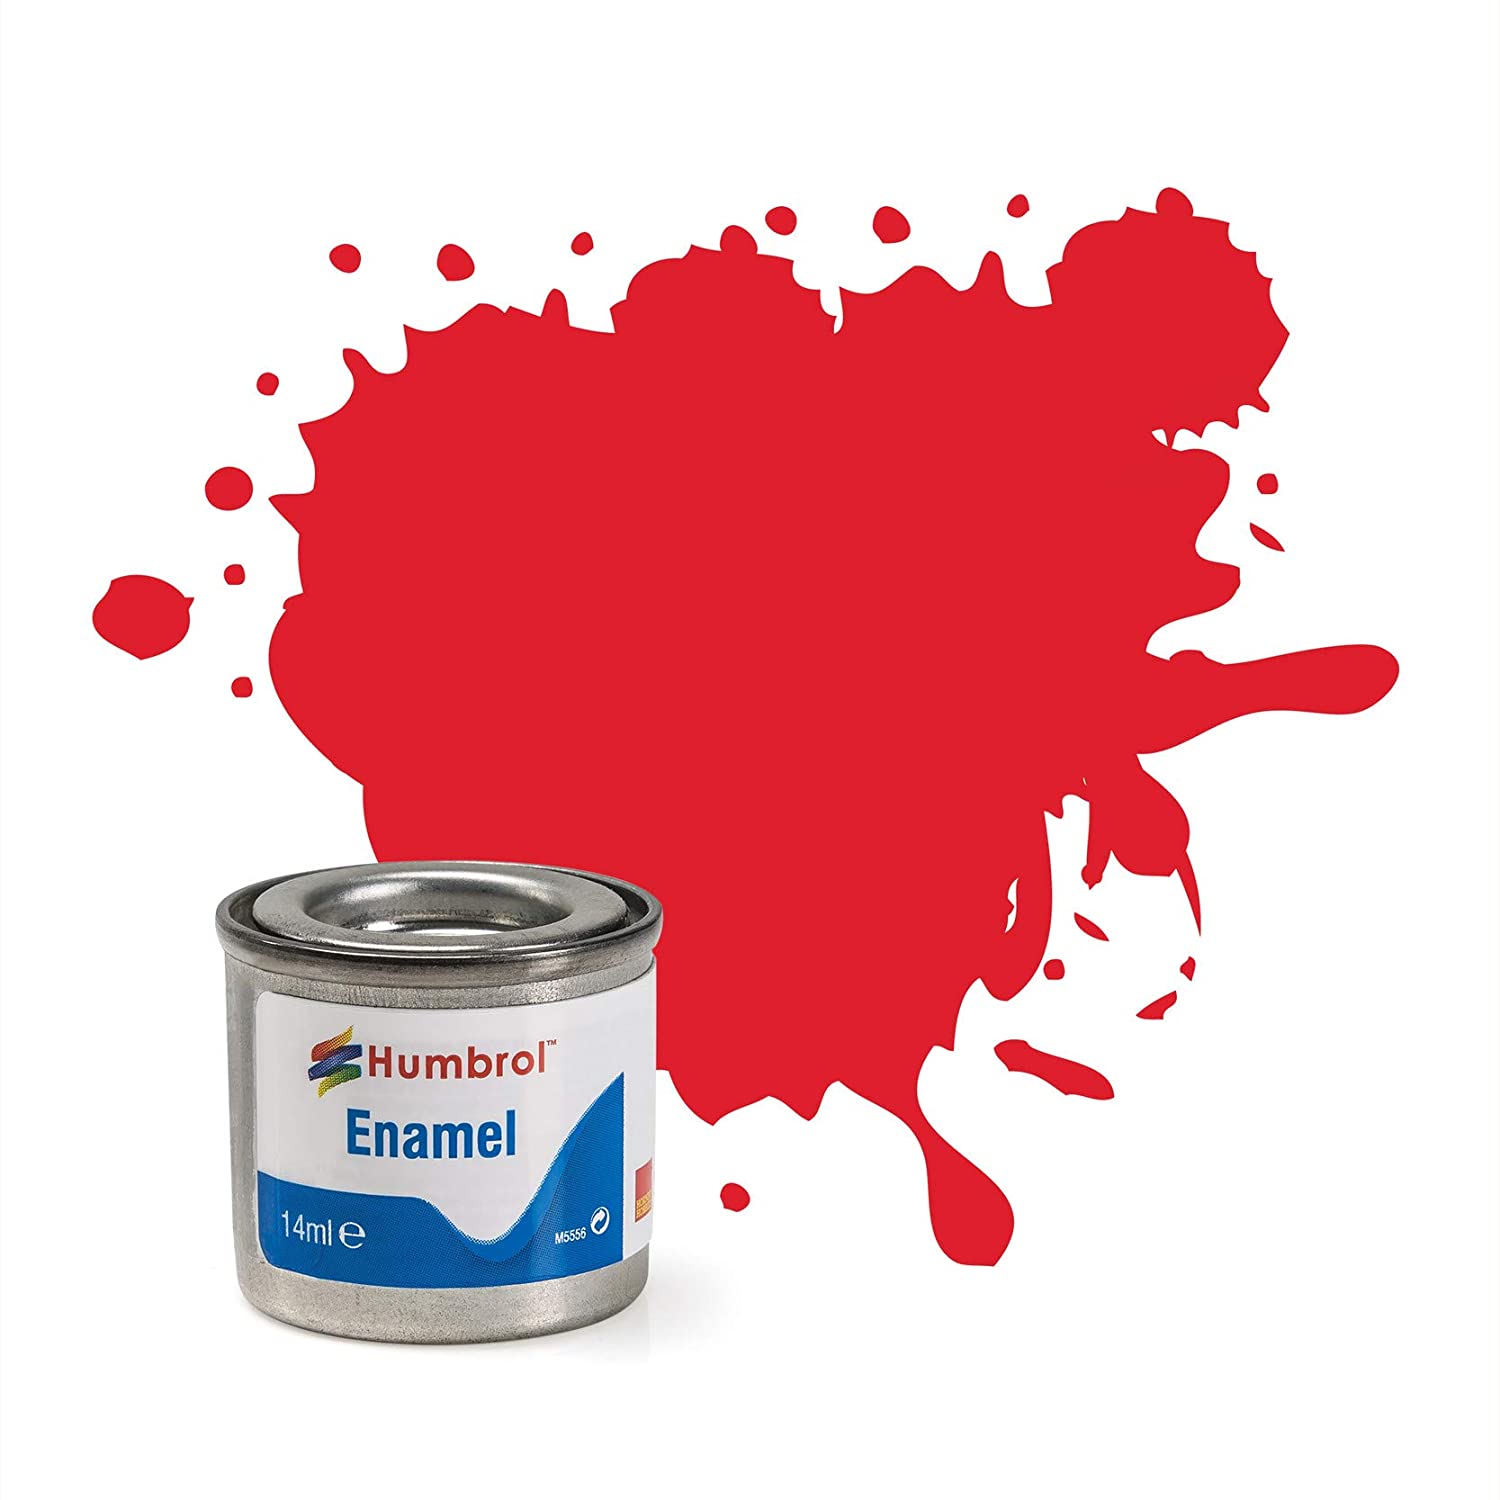 Humbrol 14ml No. 1 Tinlet Enamel Paint 19 (Bright Red Gloss)